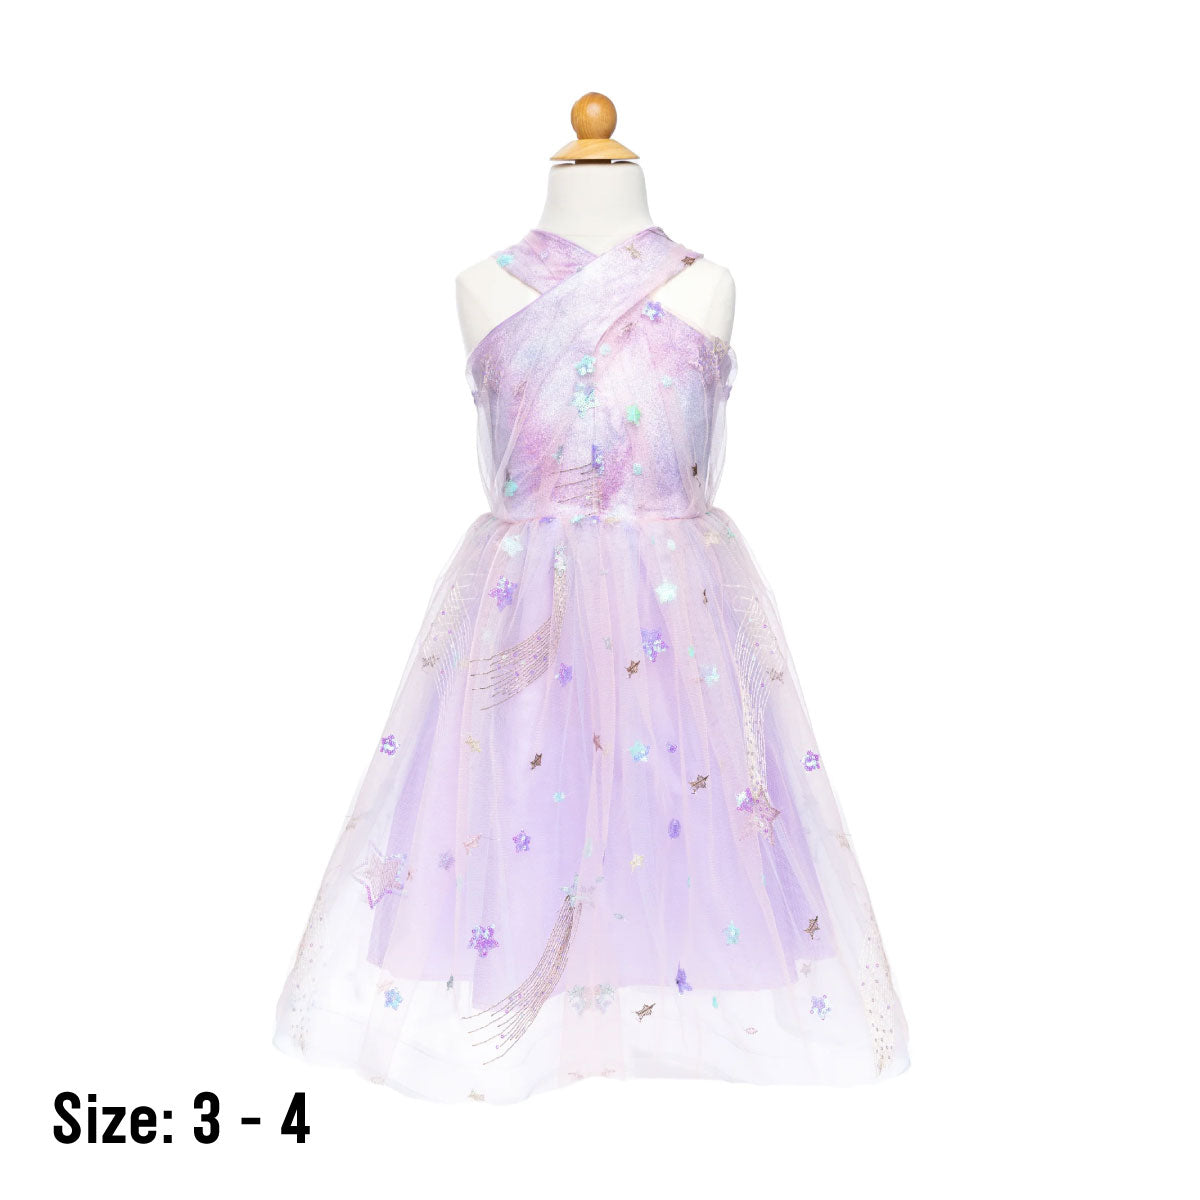 Great Pretenders Ombre Eras Dress in Lilac & Blue Size 3-4